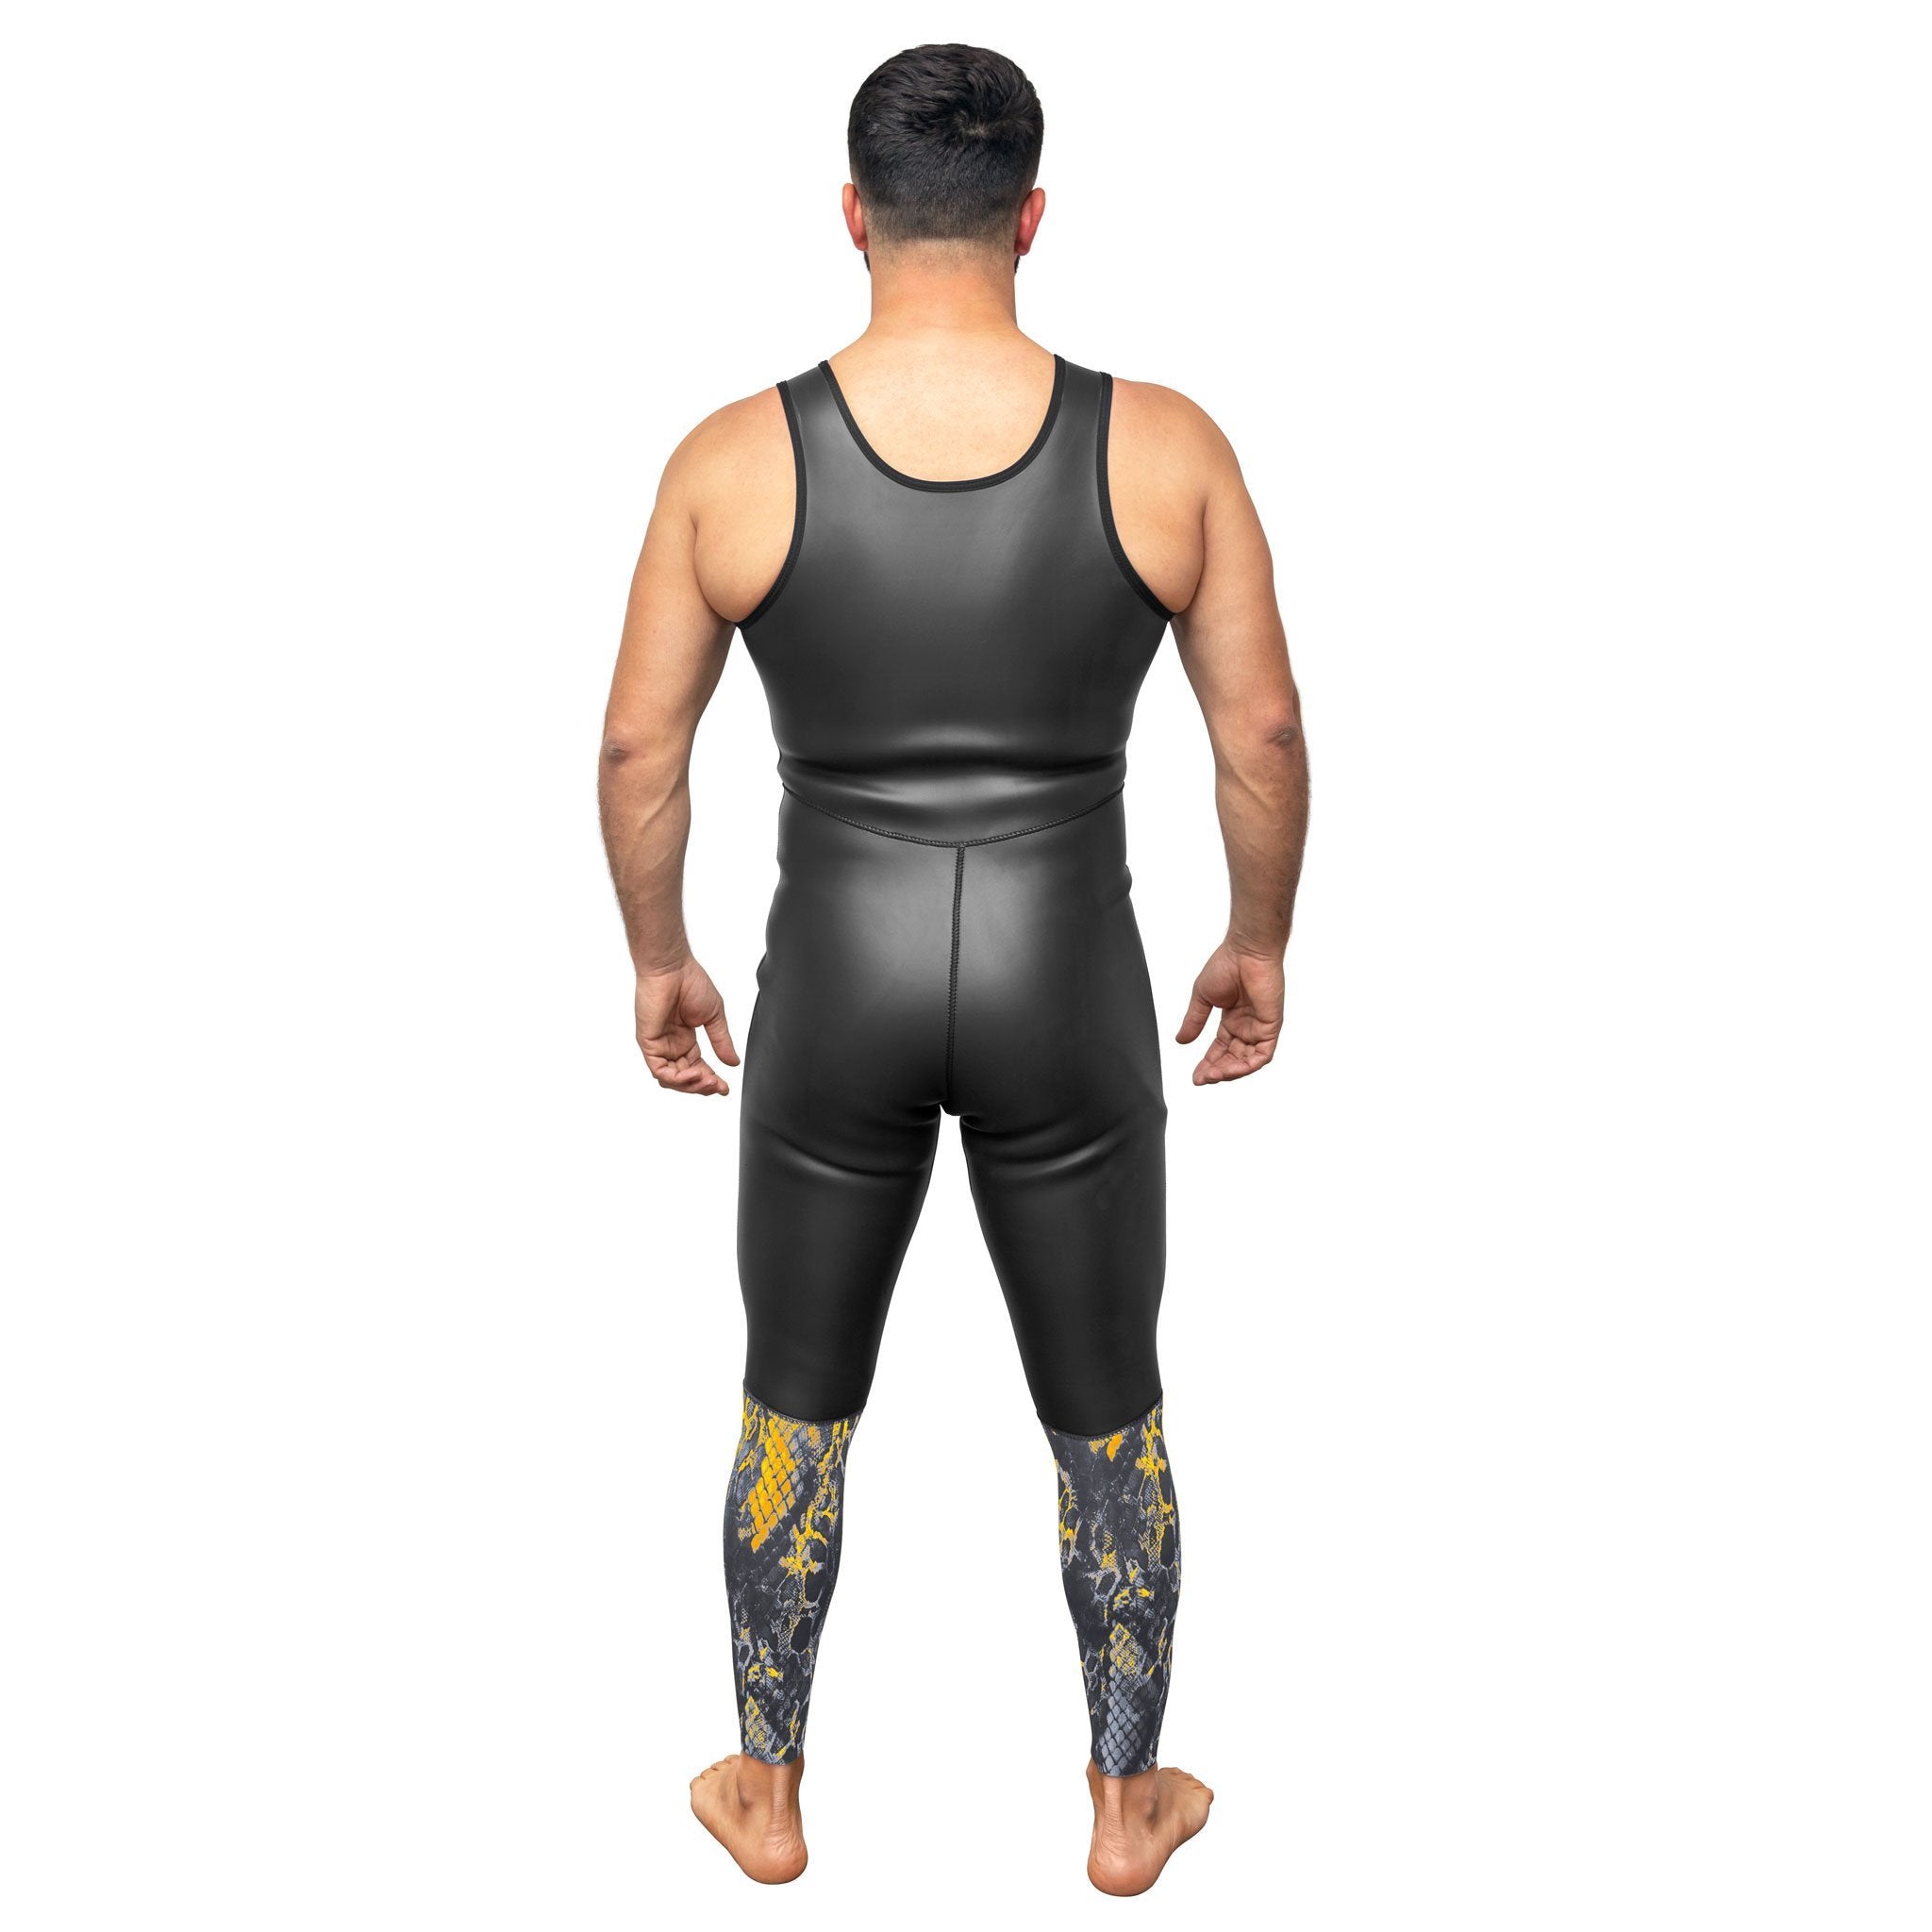 SUBLIME Smooth Skin 2-Piece Wetsuit - Long John - 2mm - Camo